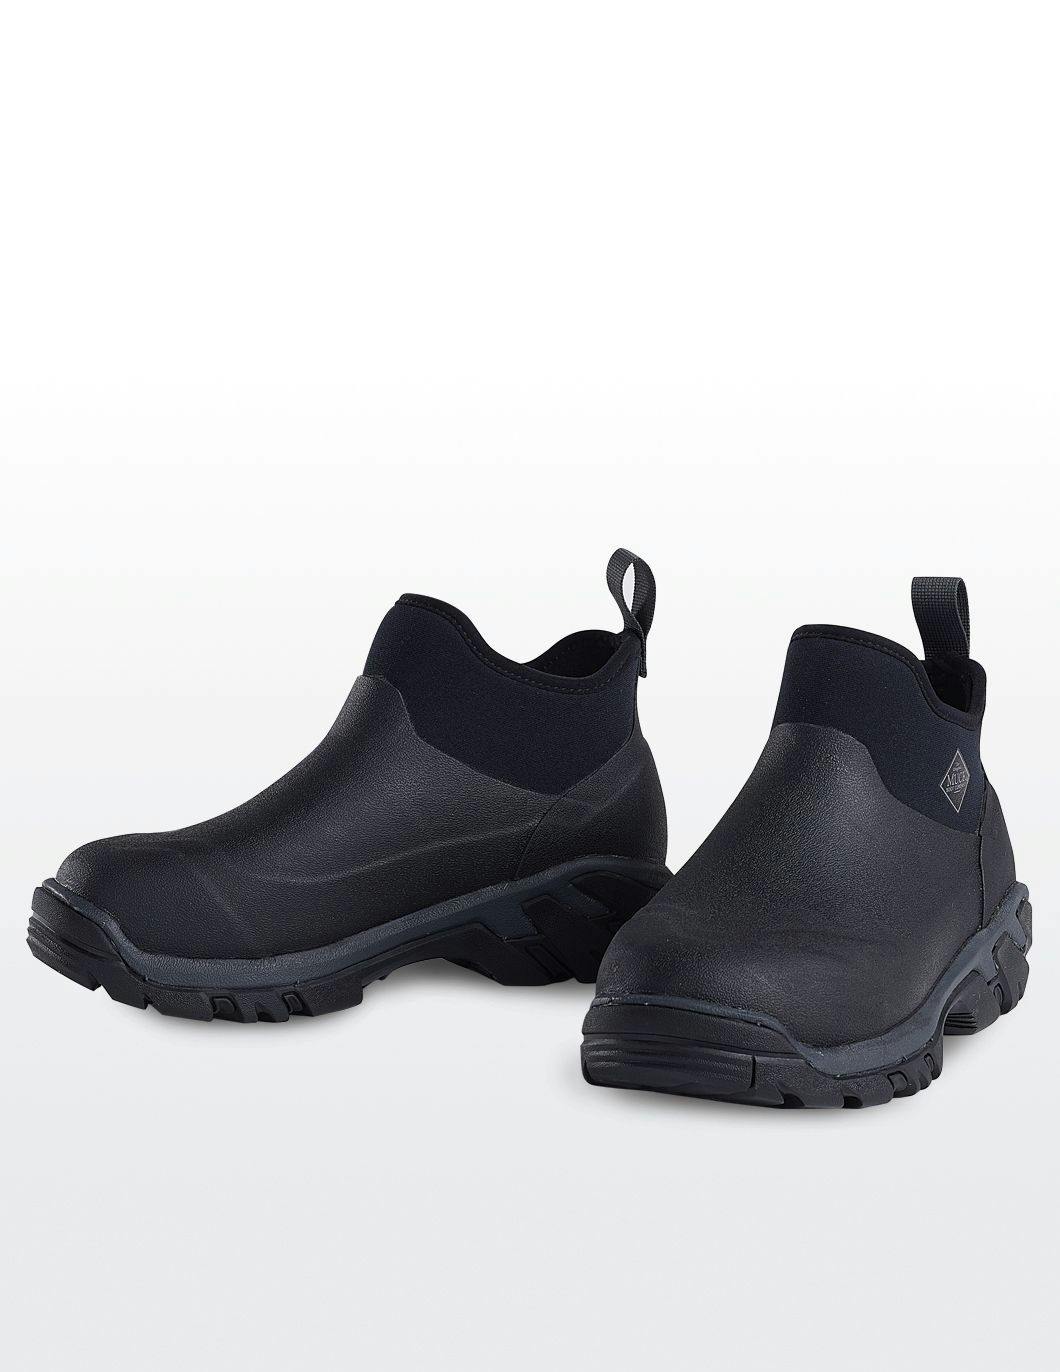 muck-mens-ankle-boot-black